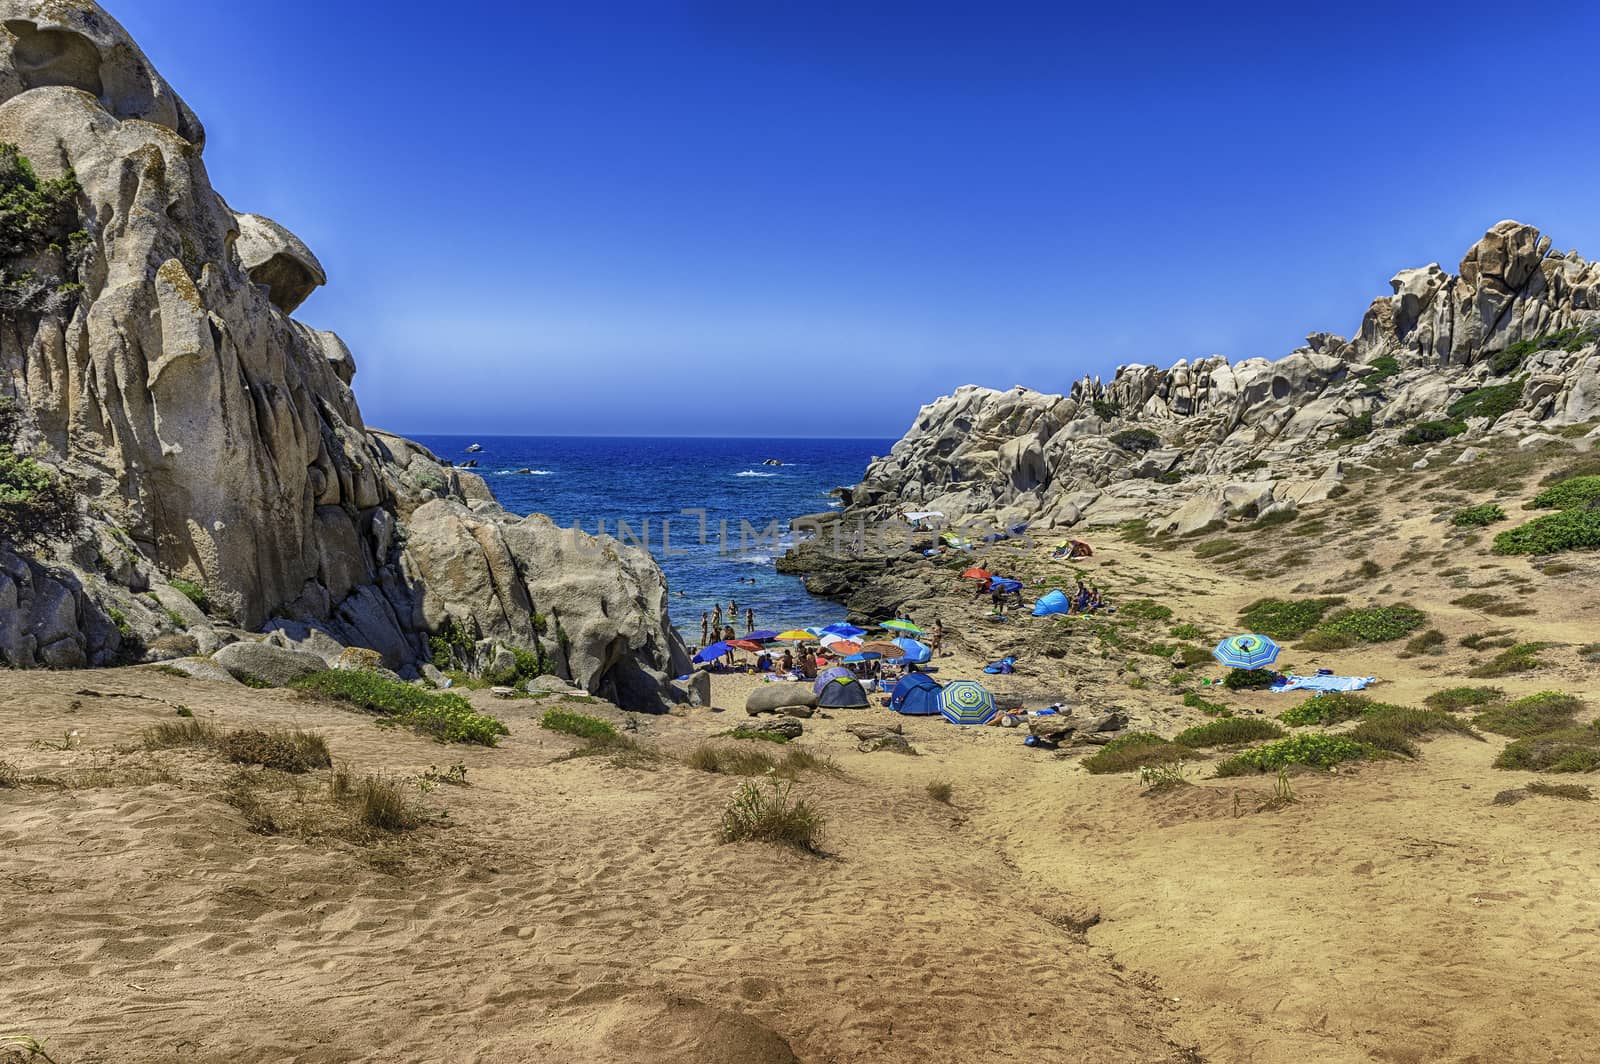 The rocky beach called Moon Valley in northern Sardinia, Italy by marcorubino